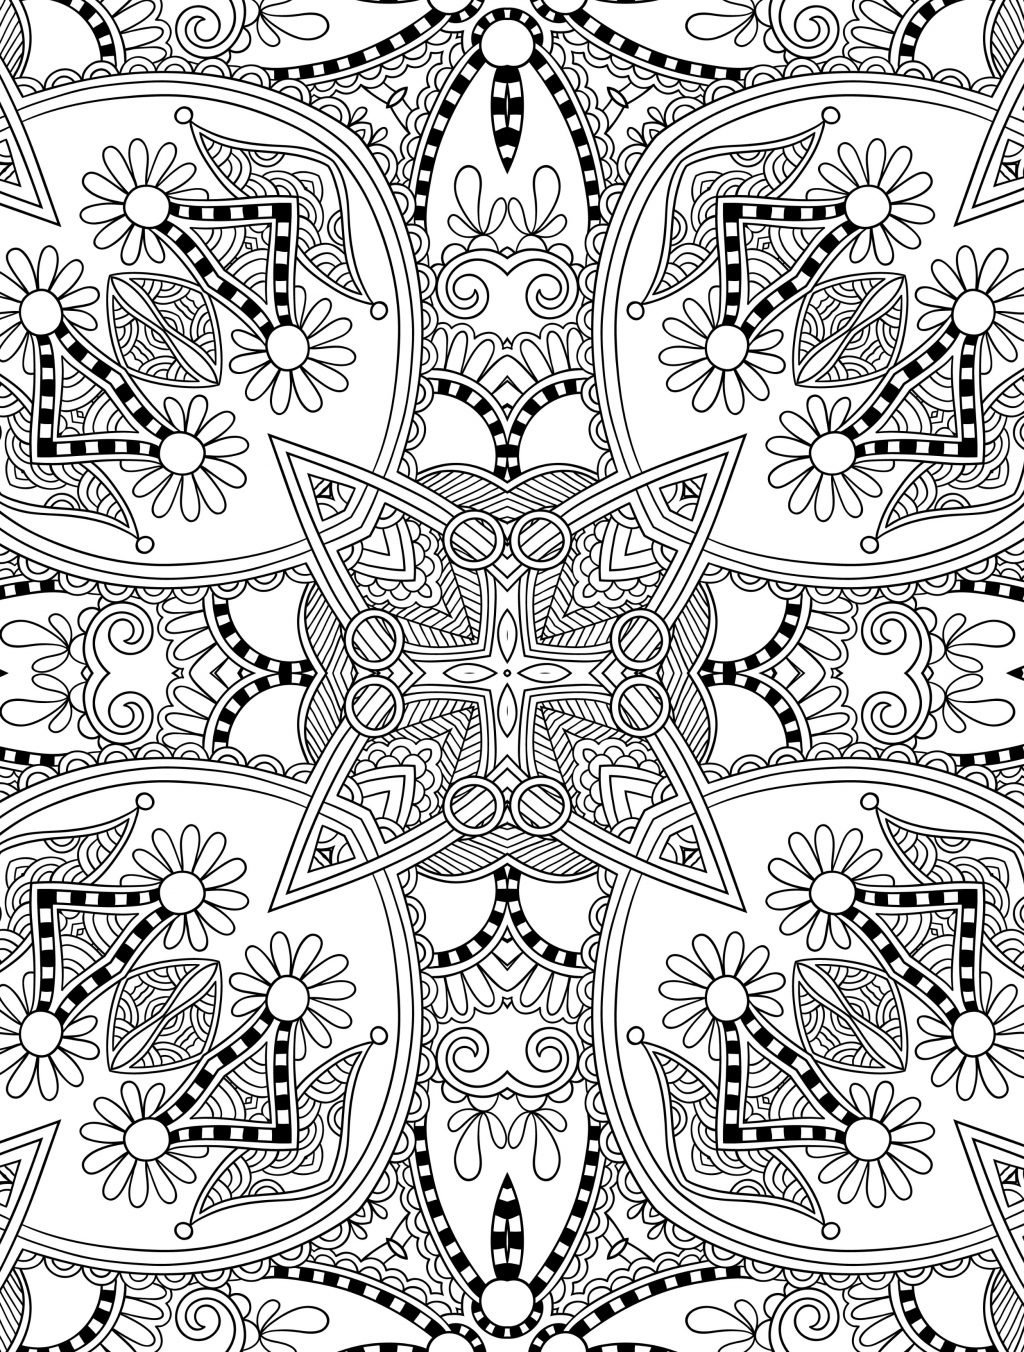 Coloring Page ~ Free Printable Coloring Pages Page Staggering - Free Printable Coloring Designs For Adults